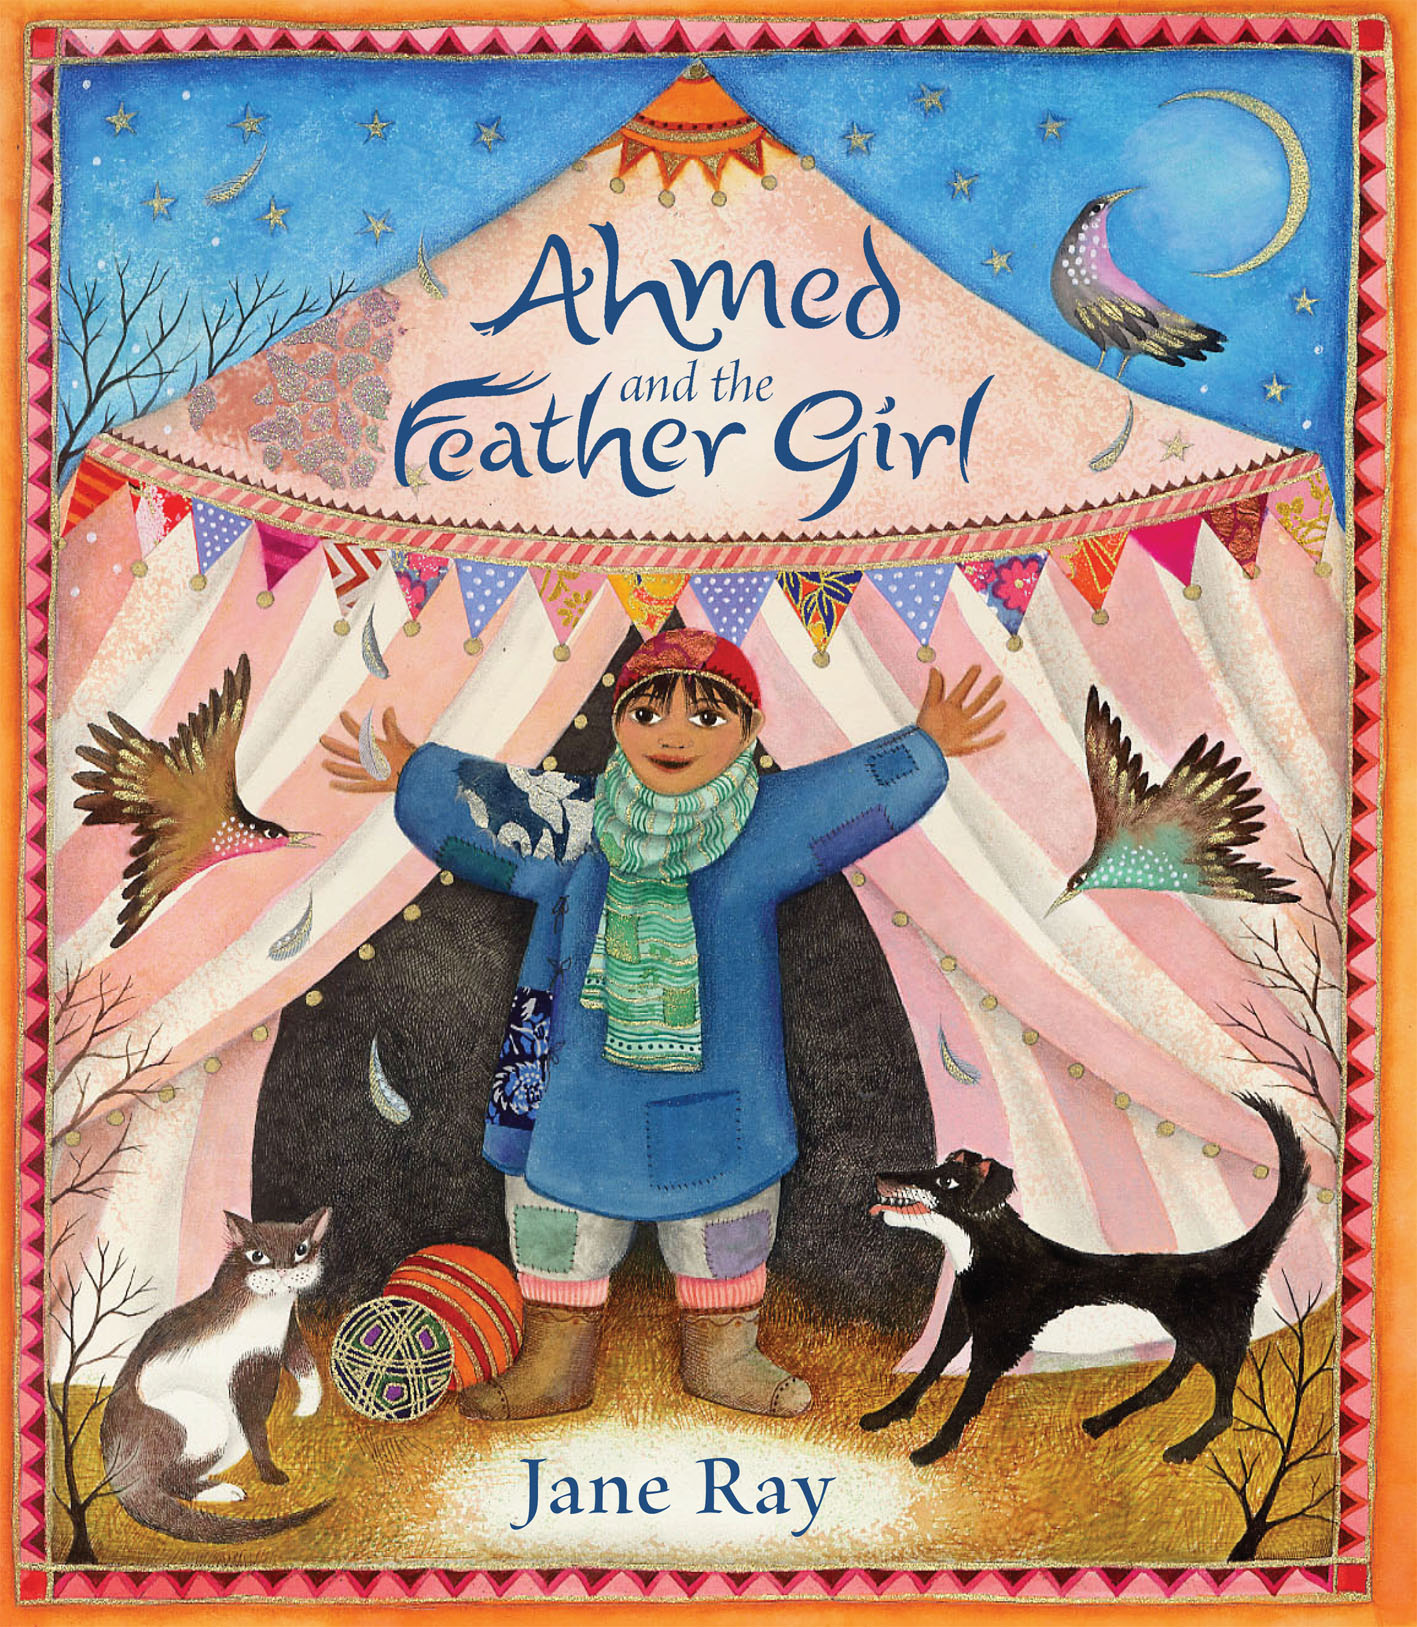 Ahmed and the Feather Girl Book Cover